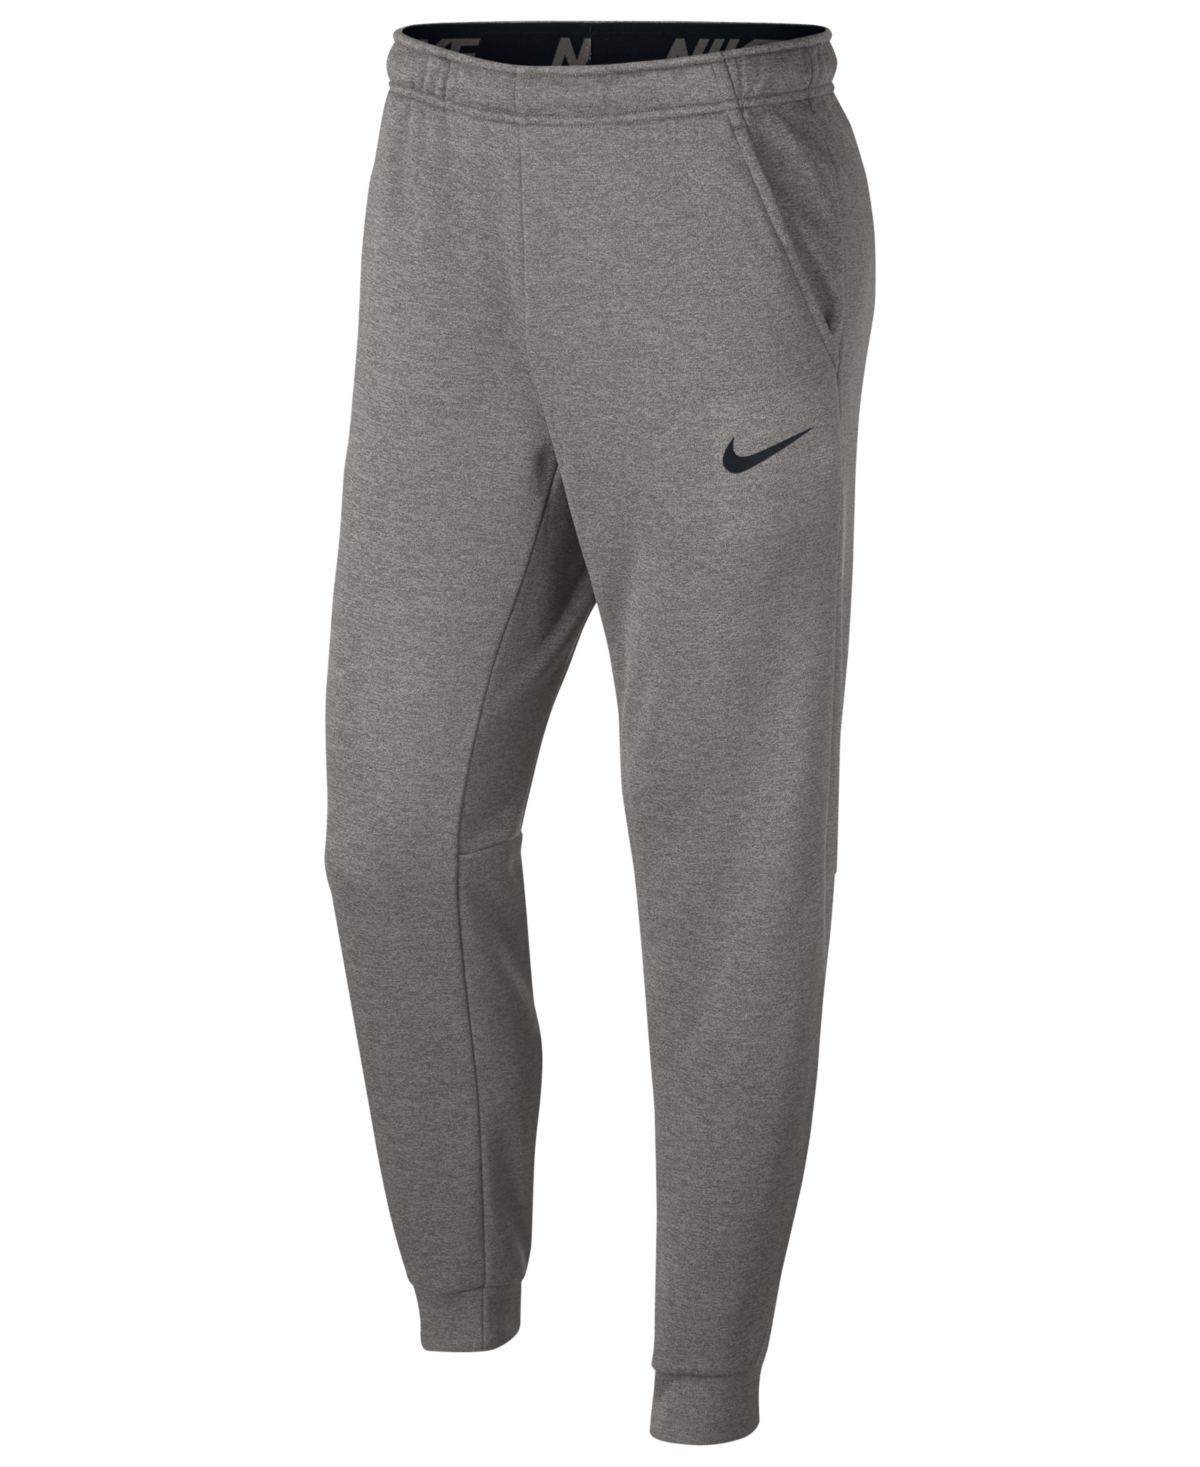 UPC 886668340395 product image for Nike Men's Therma Tapered Training Pants | upcitemdb.com